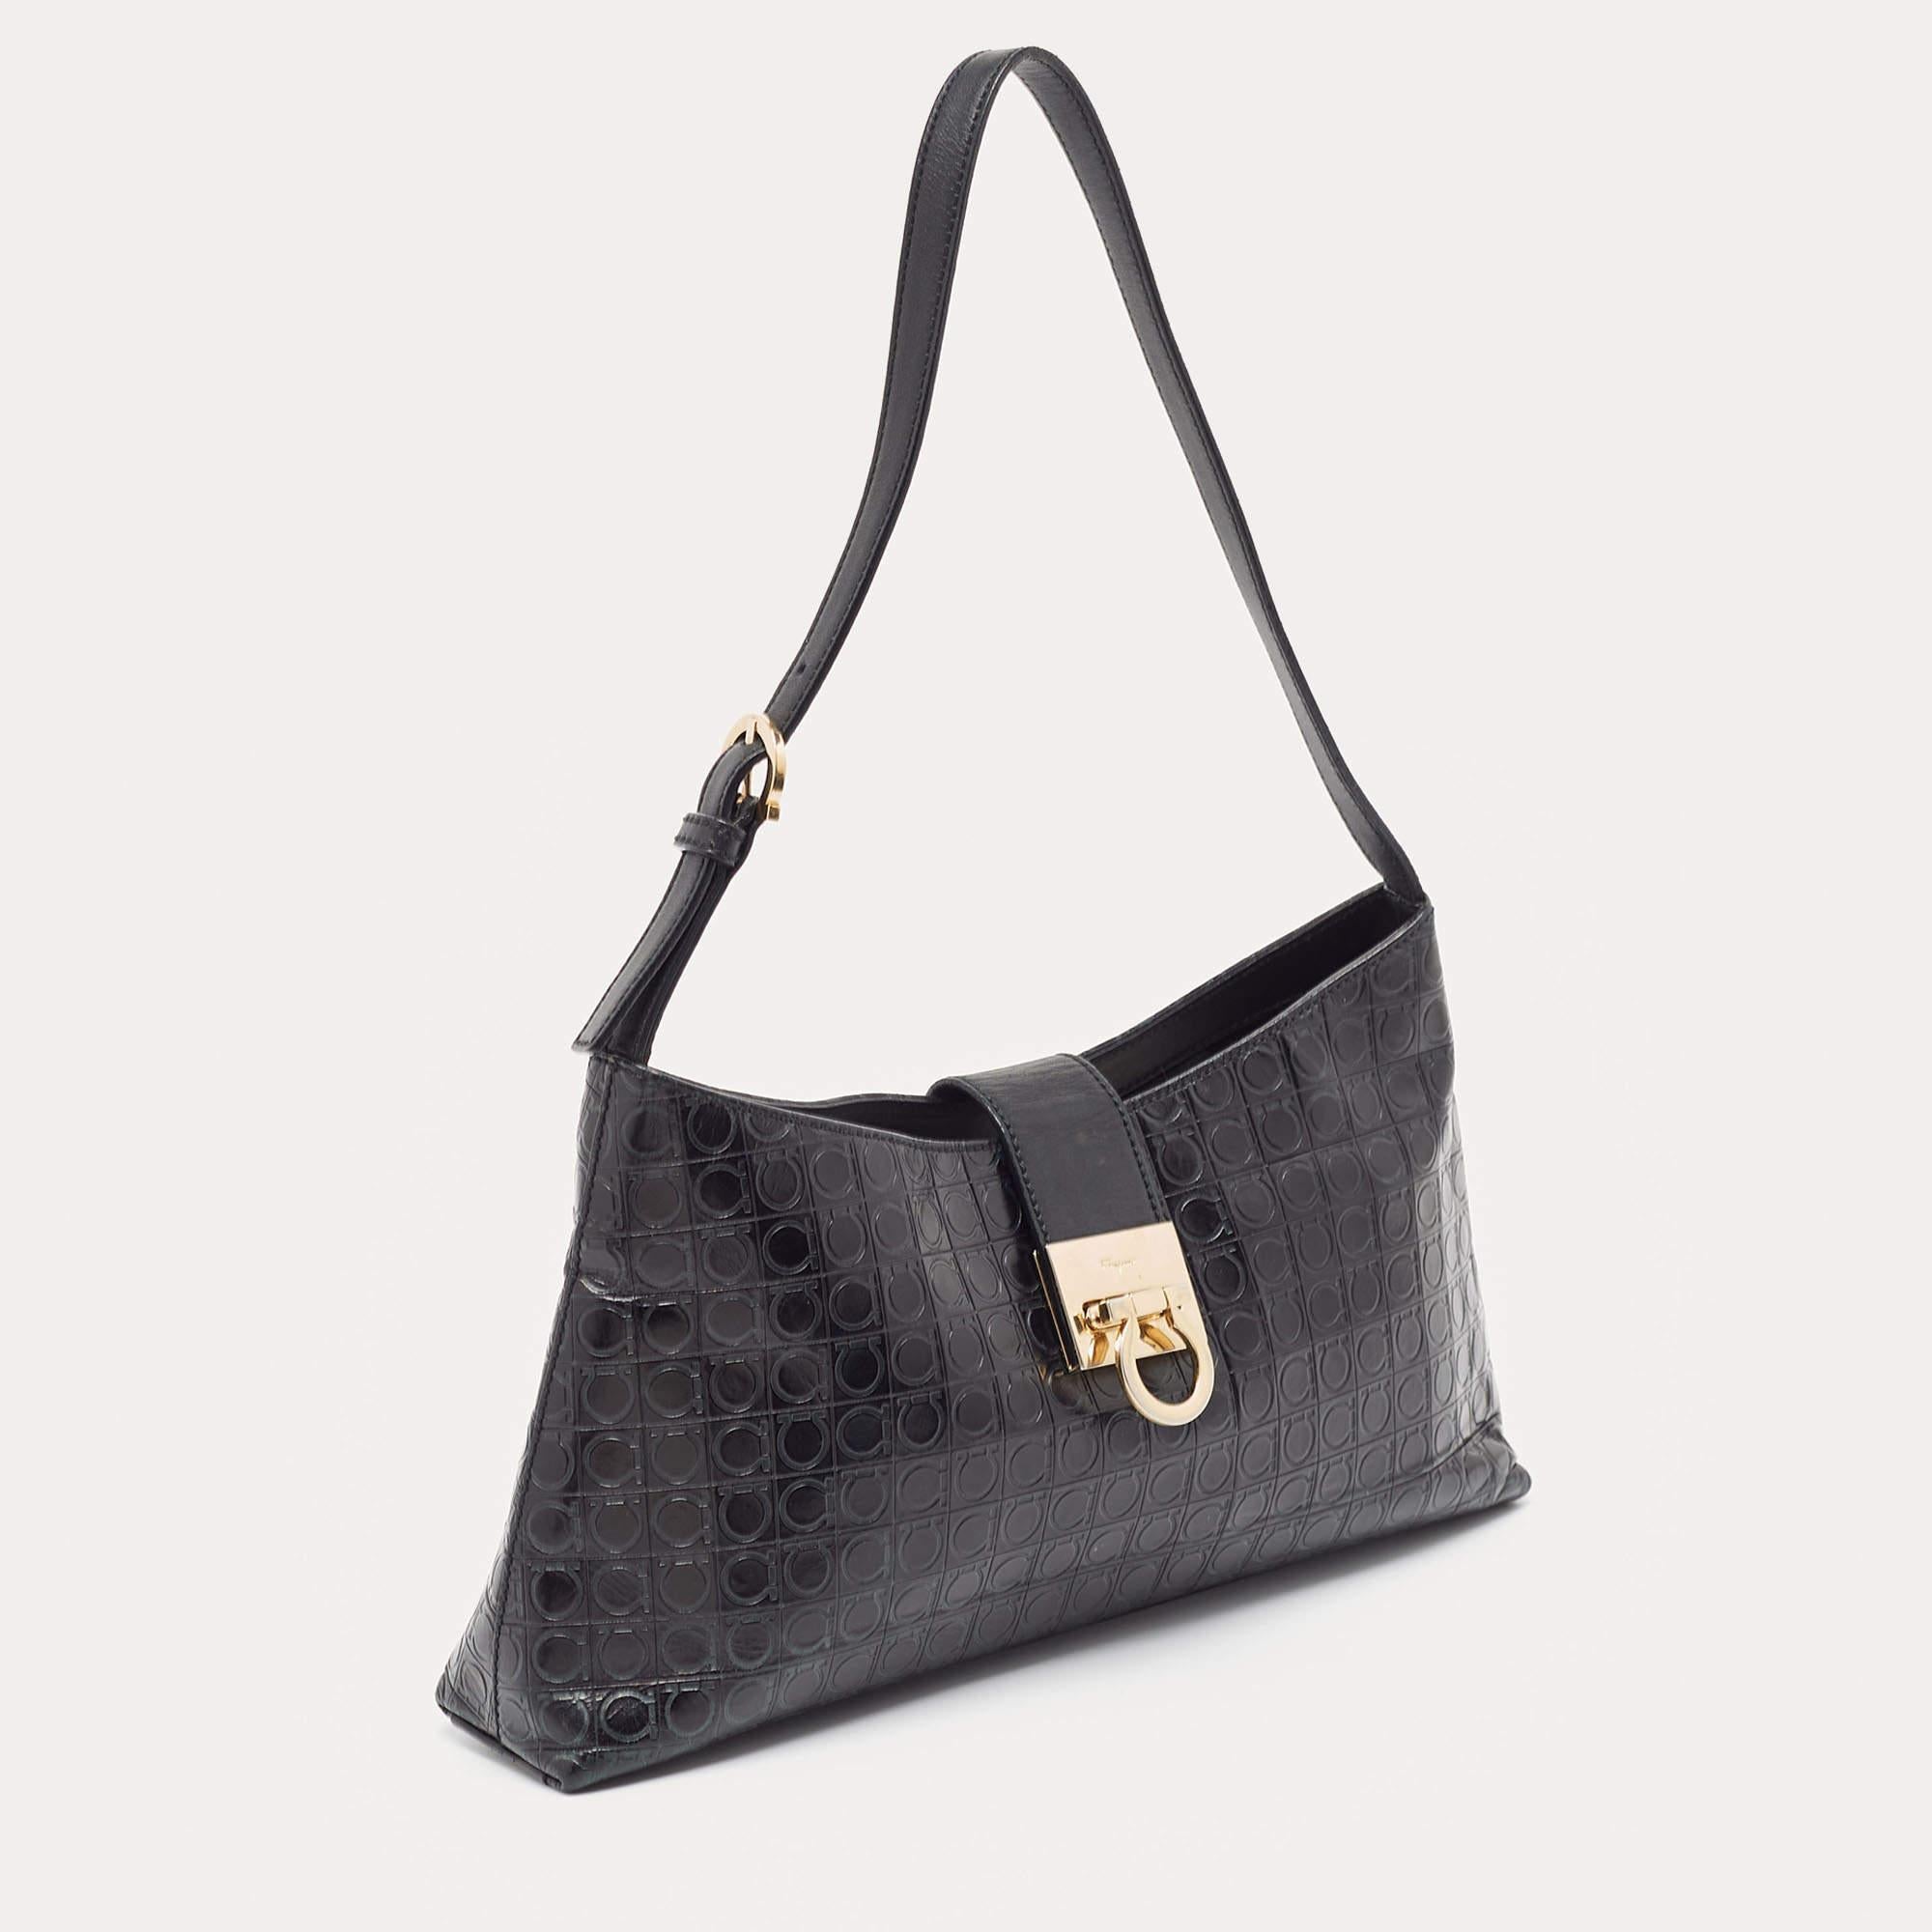 This elegant handbag by Salvatore Ferragamo will make you stand apart from the crowd. Crafted from leather it flaunts the Gancini logo embossed on the exterior. It features a single handle and the Gancini logo on the flap opens to a nylon lined